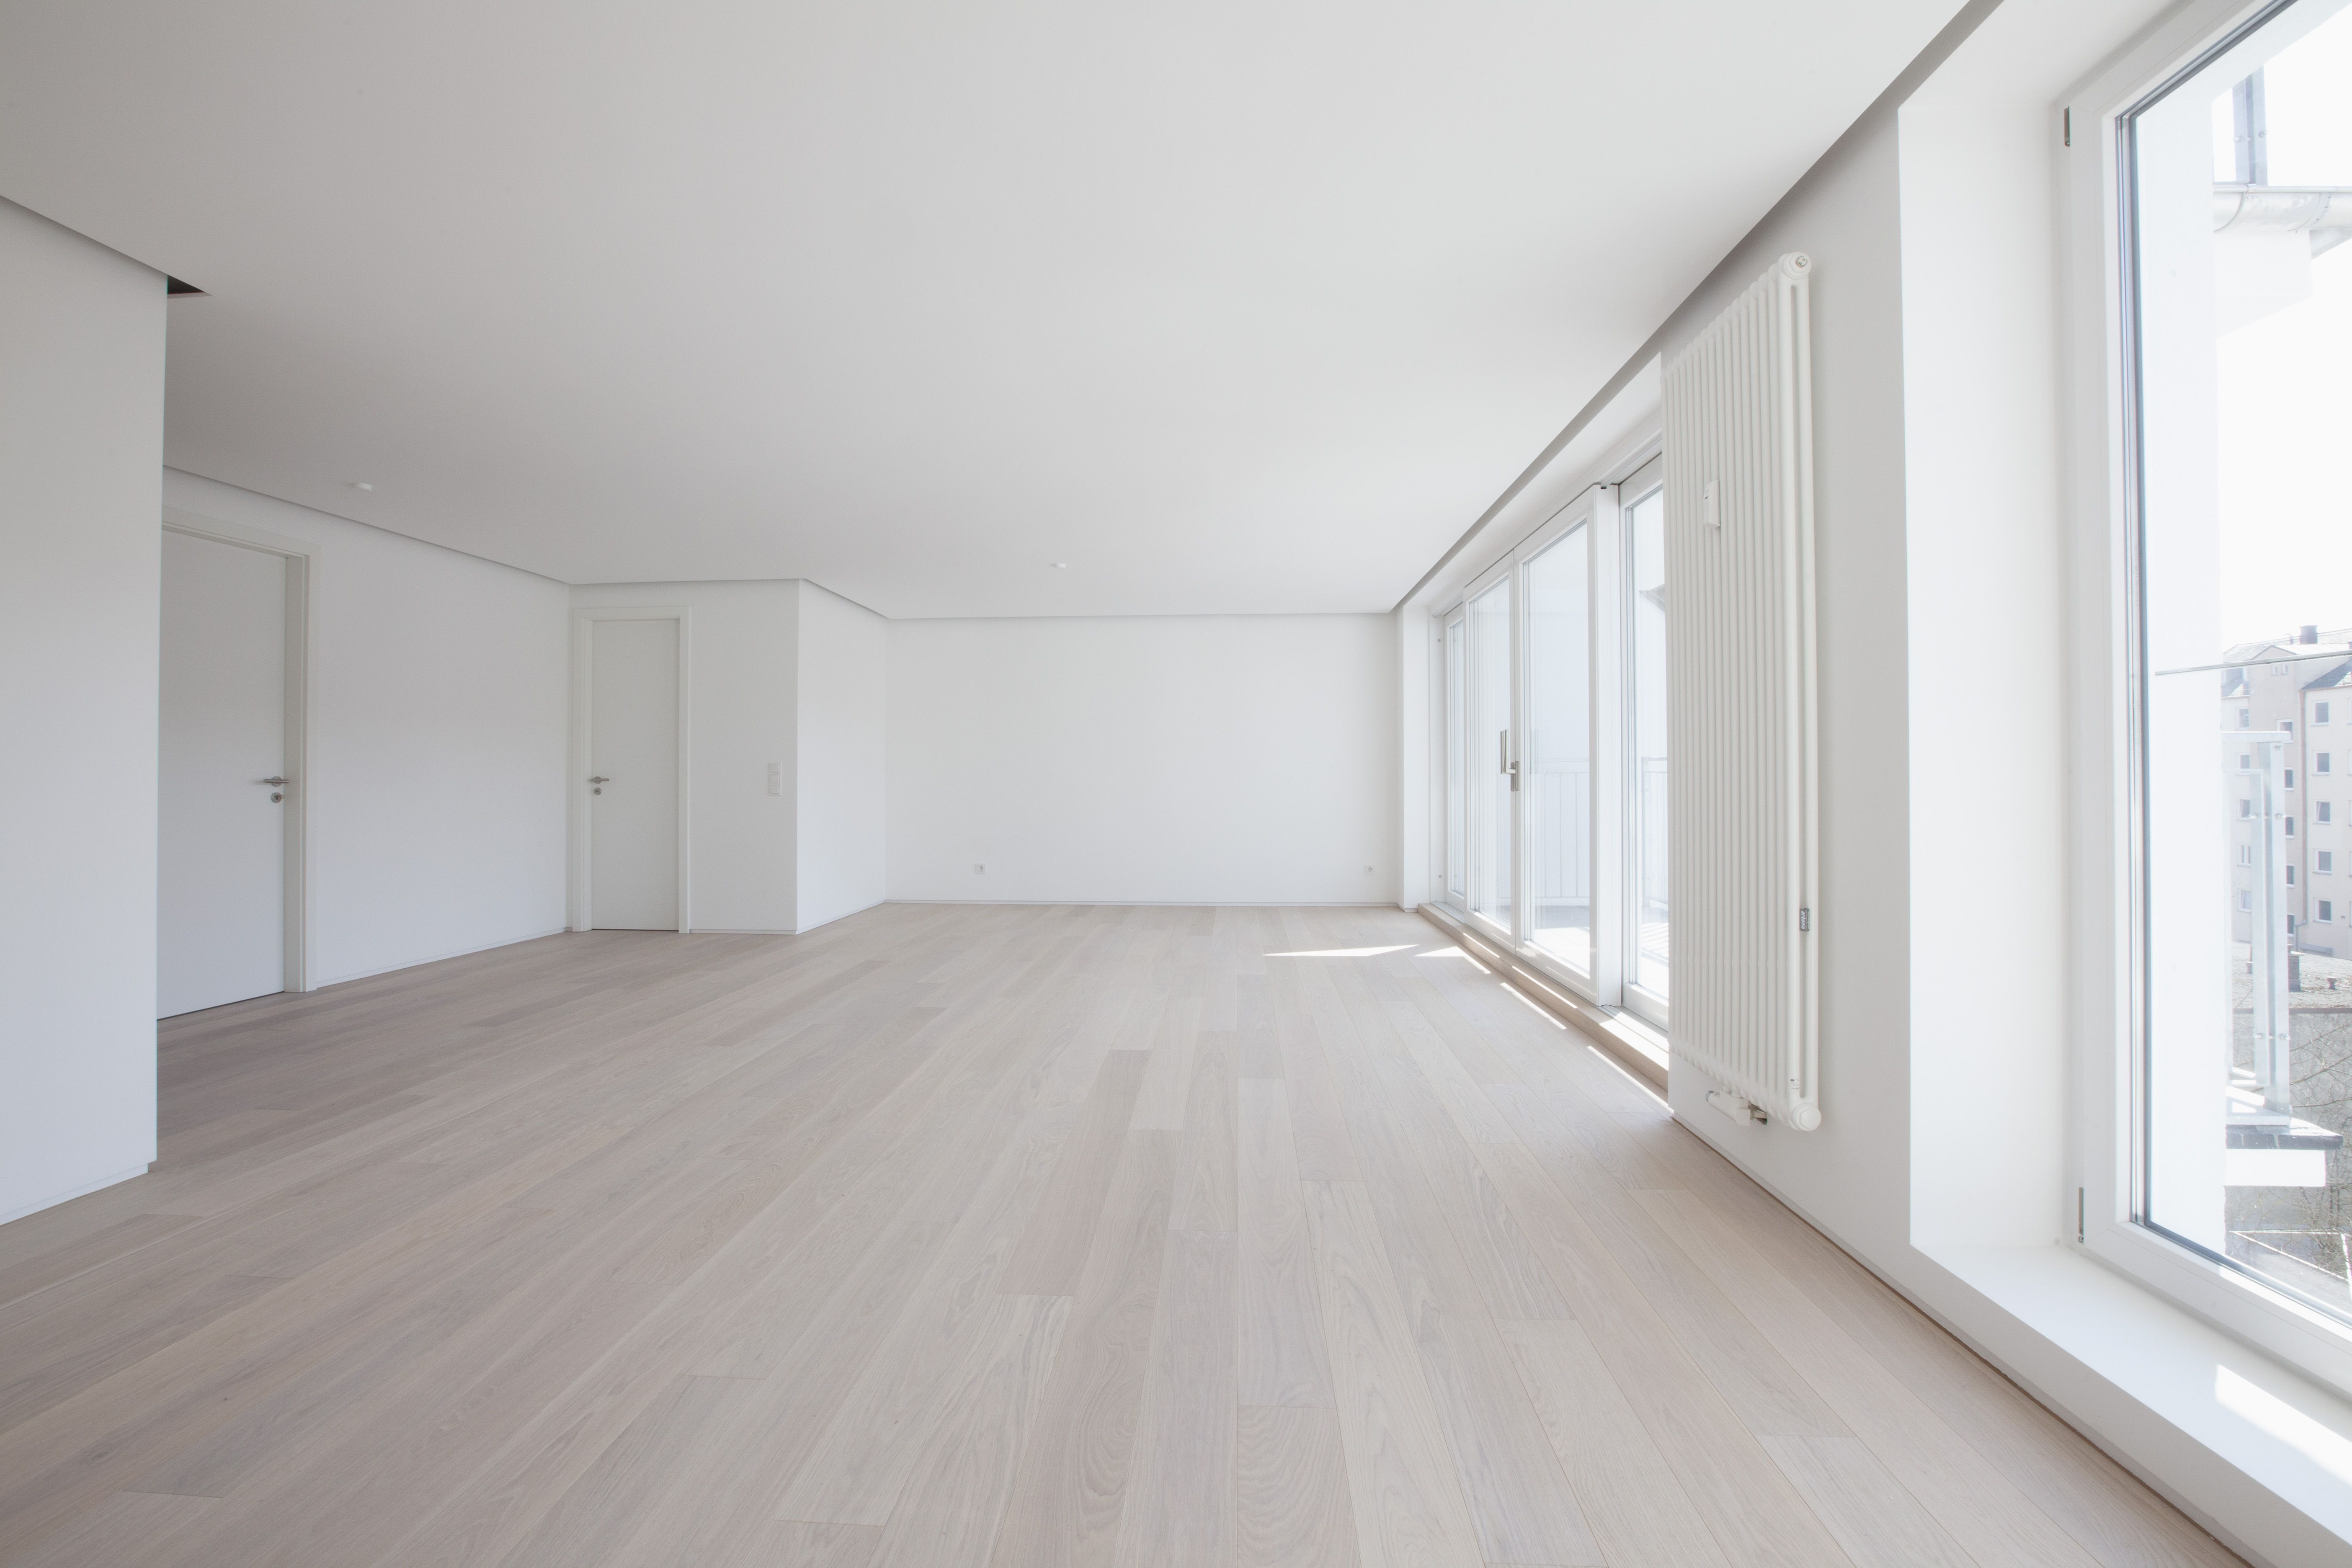 30 Ideal Refinish Hardwood Floors Gray 2024 free download refinish hardwood floors gray of basics of favorite hybrid engineered wood floors with empty living room in modern apartment 578189139 58866f903df78c2ccdecab05